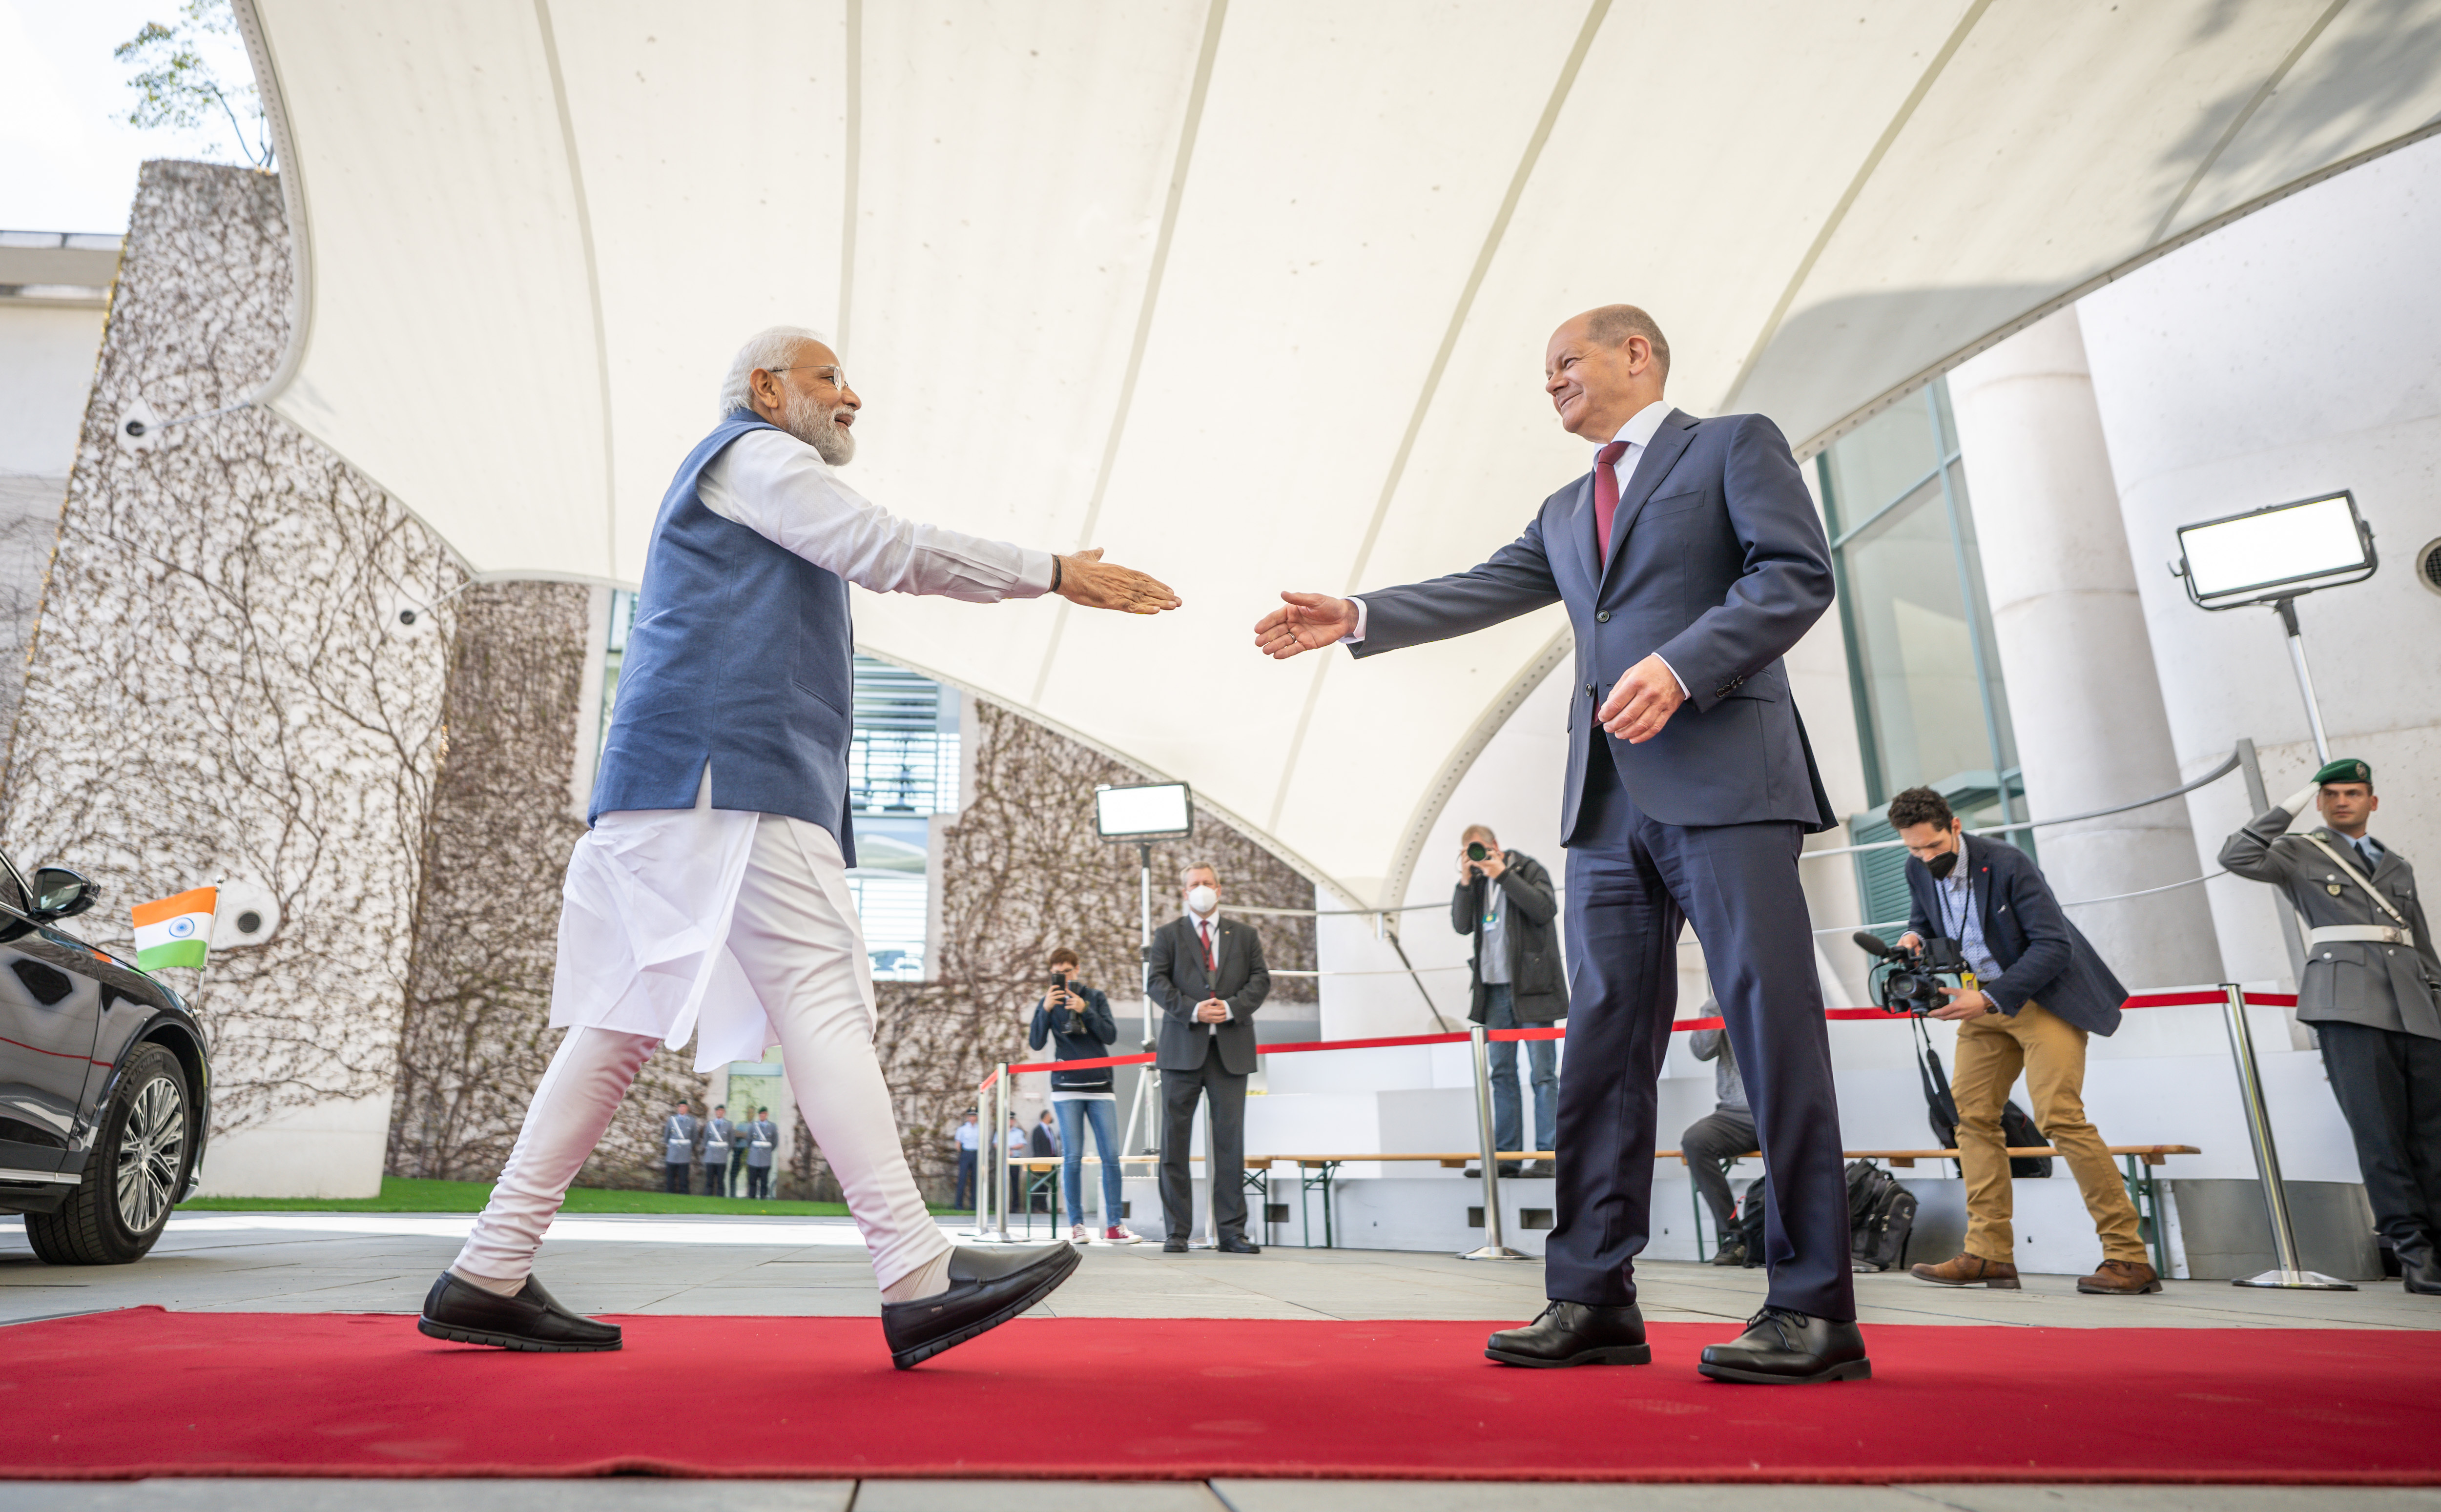 Indo-German Relations – A New Perspective for the Asian Region